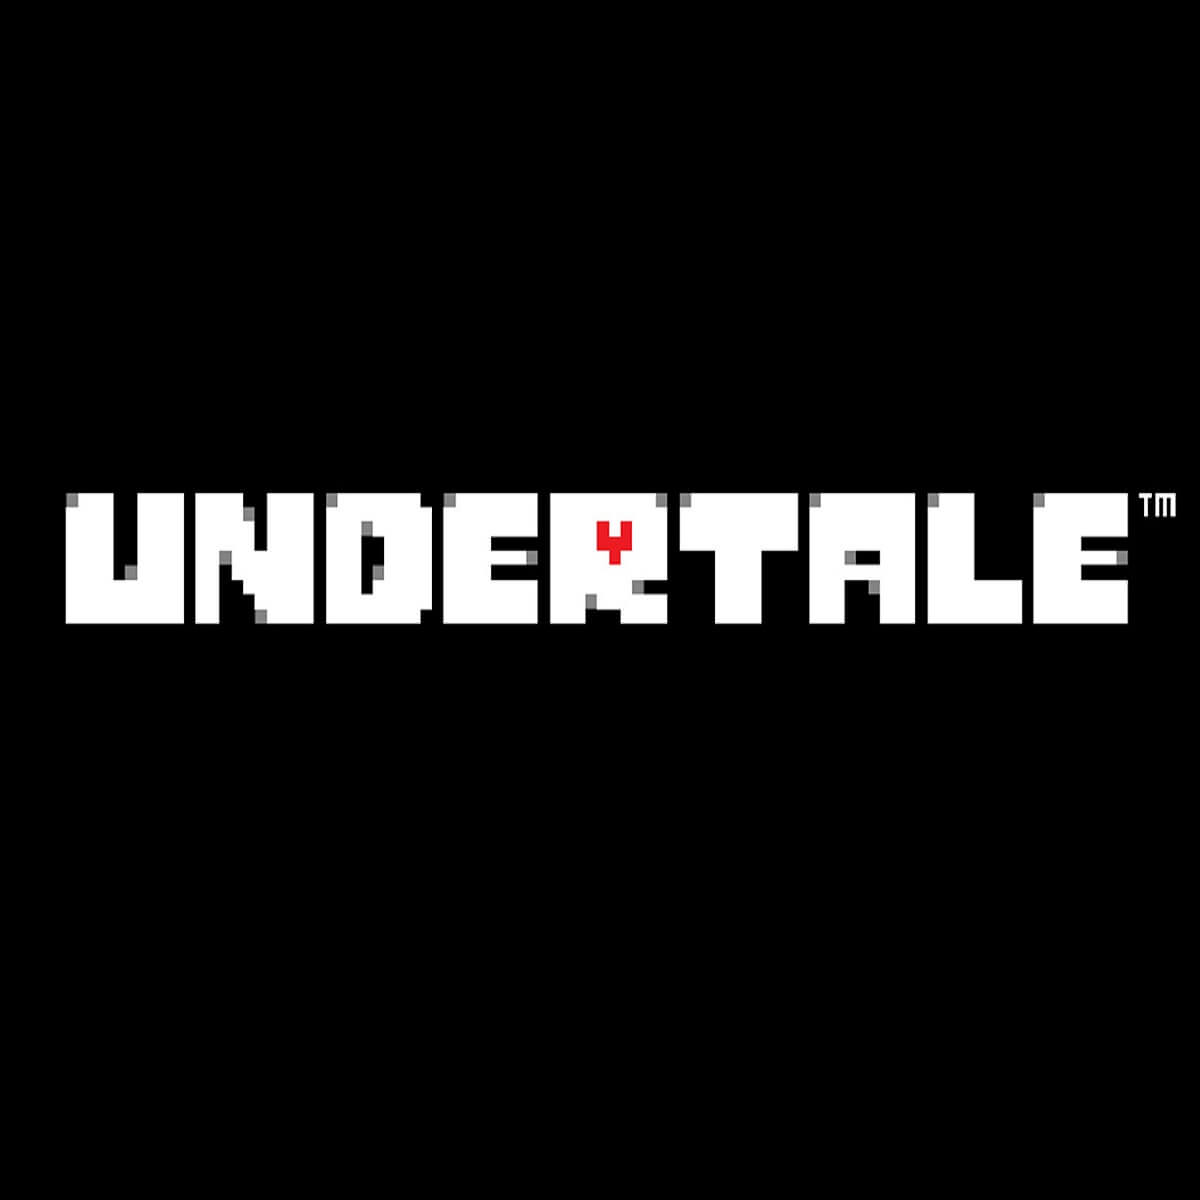 Trouble Launching Undertale from Steam - Workaround 